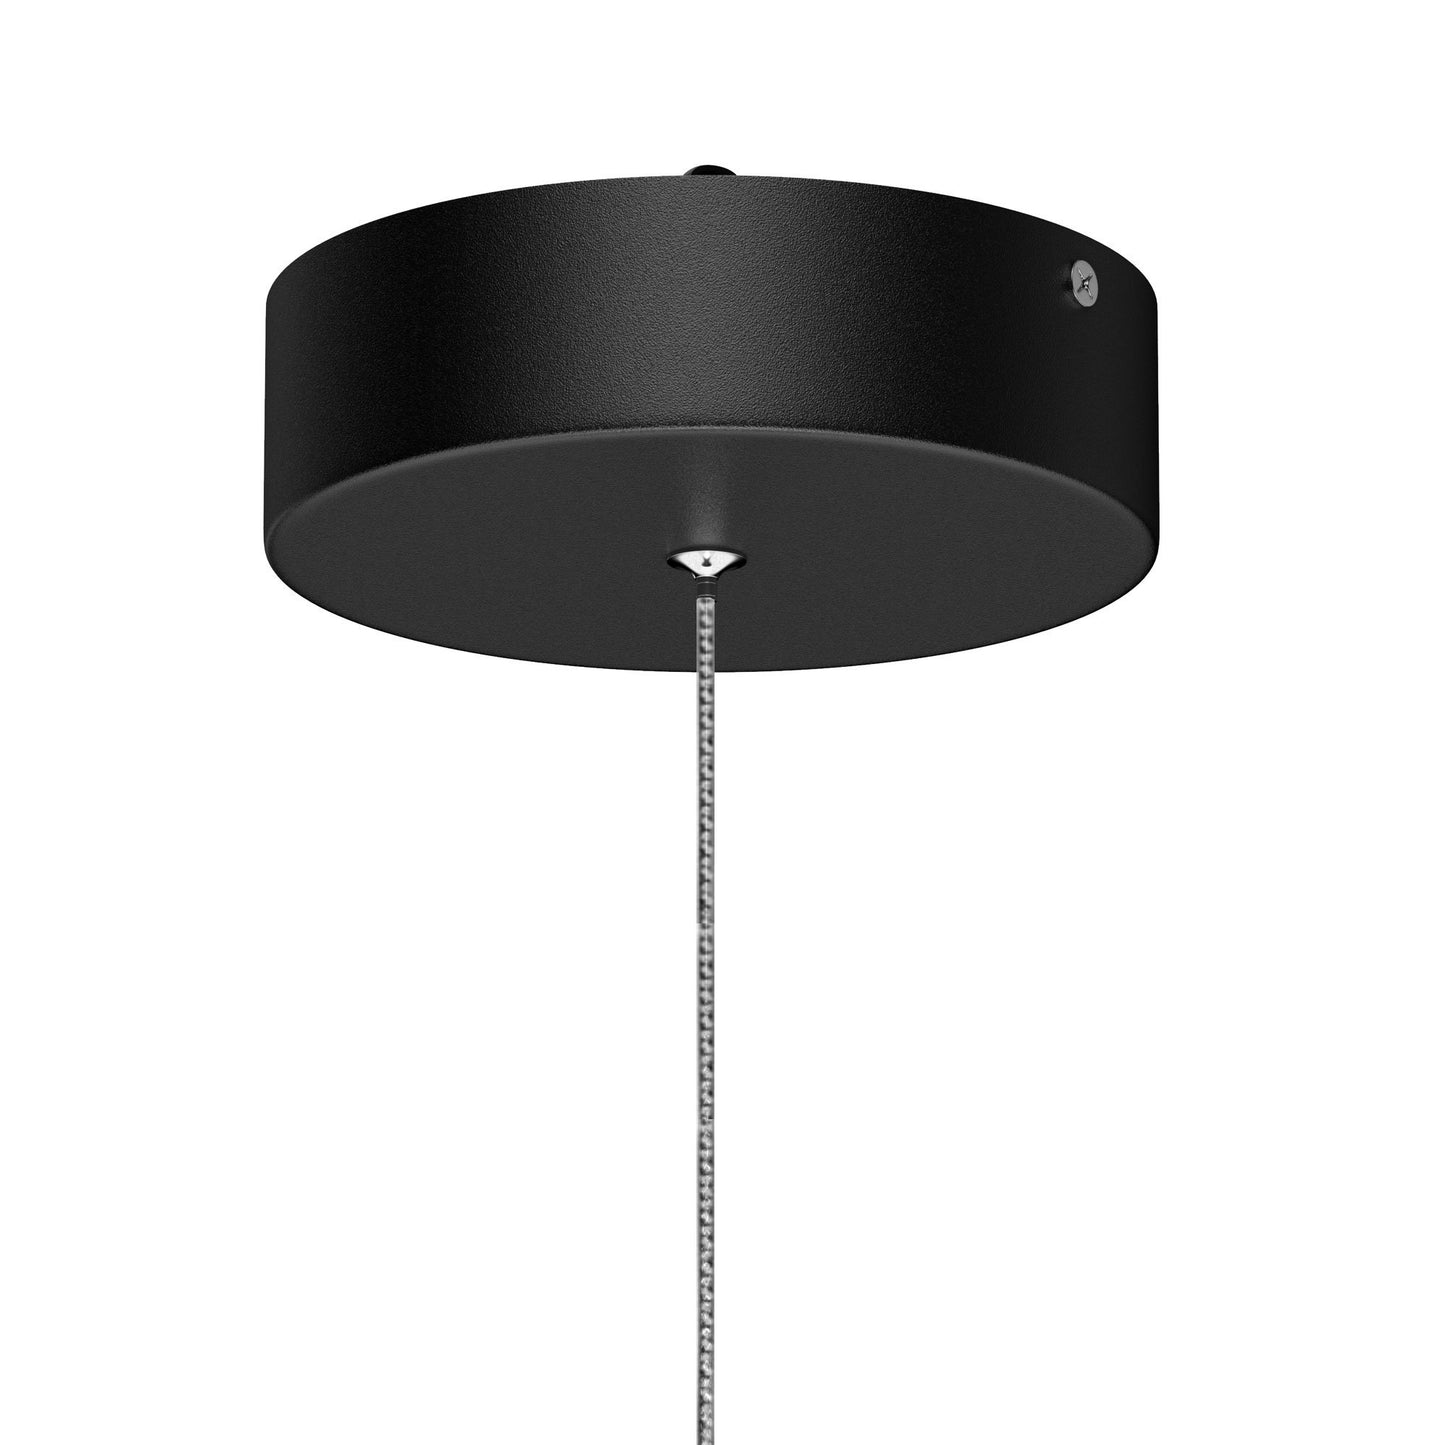 41W Round Plate Pendant Light, 3000K, 2225LM, Diameter 17.3" x 55"H, Dimmable, Home Office Lighting